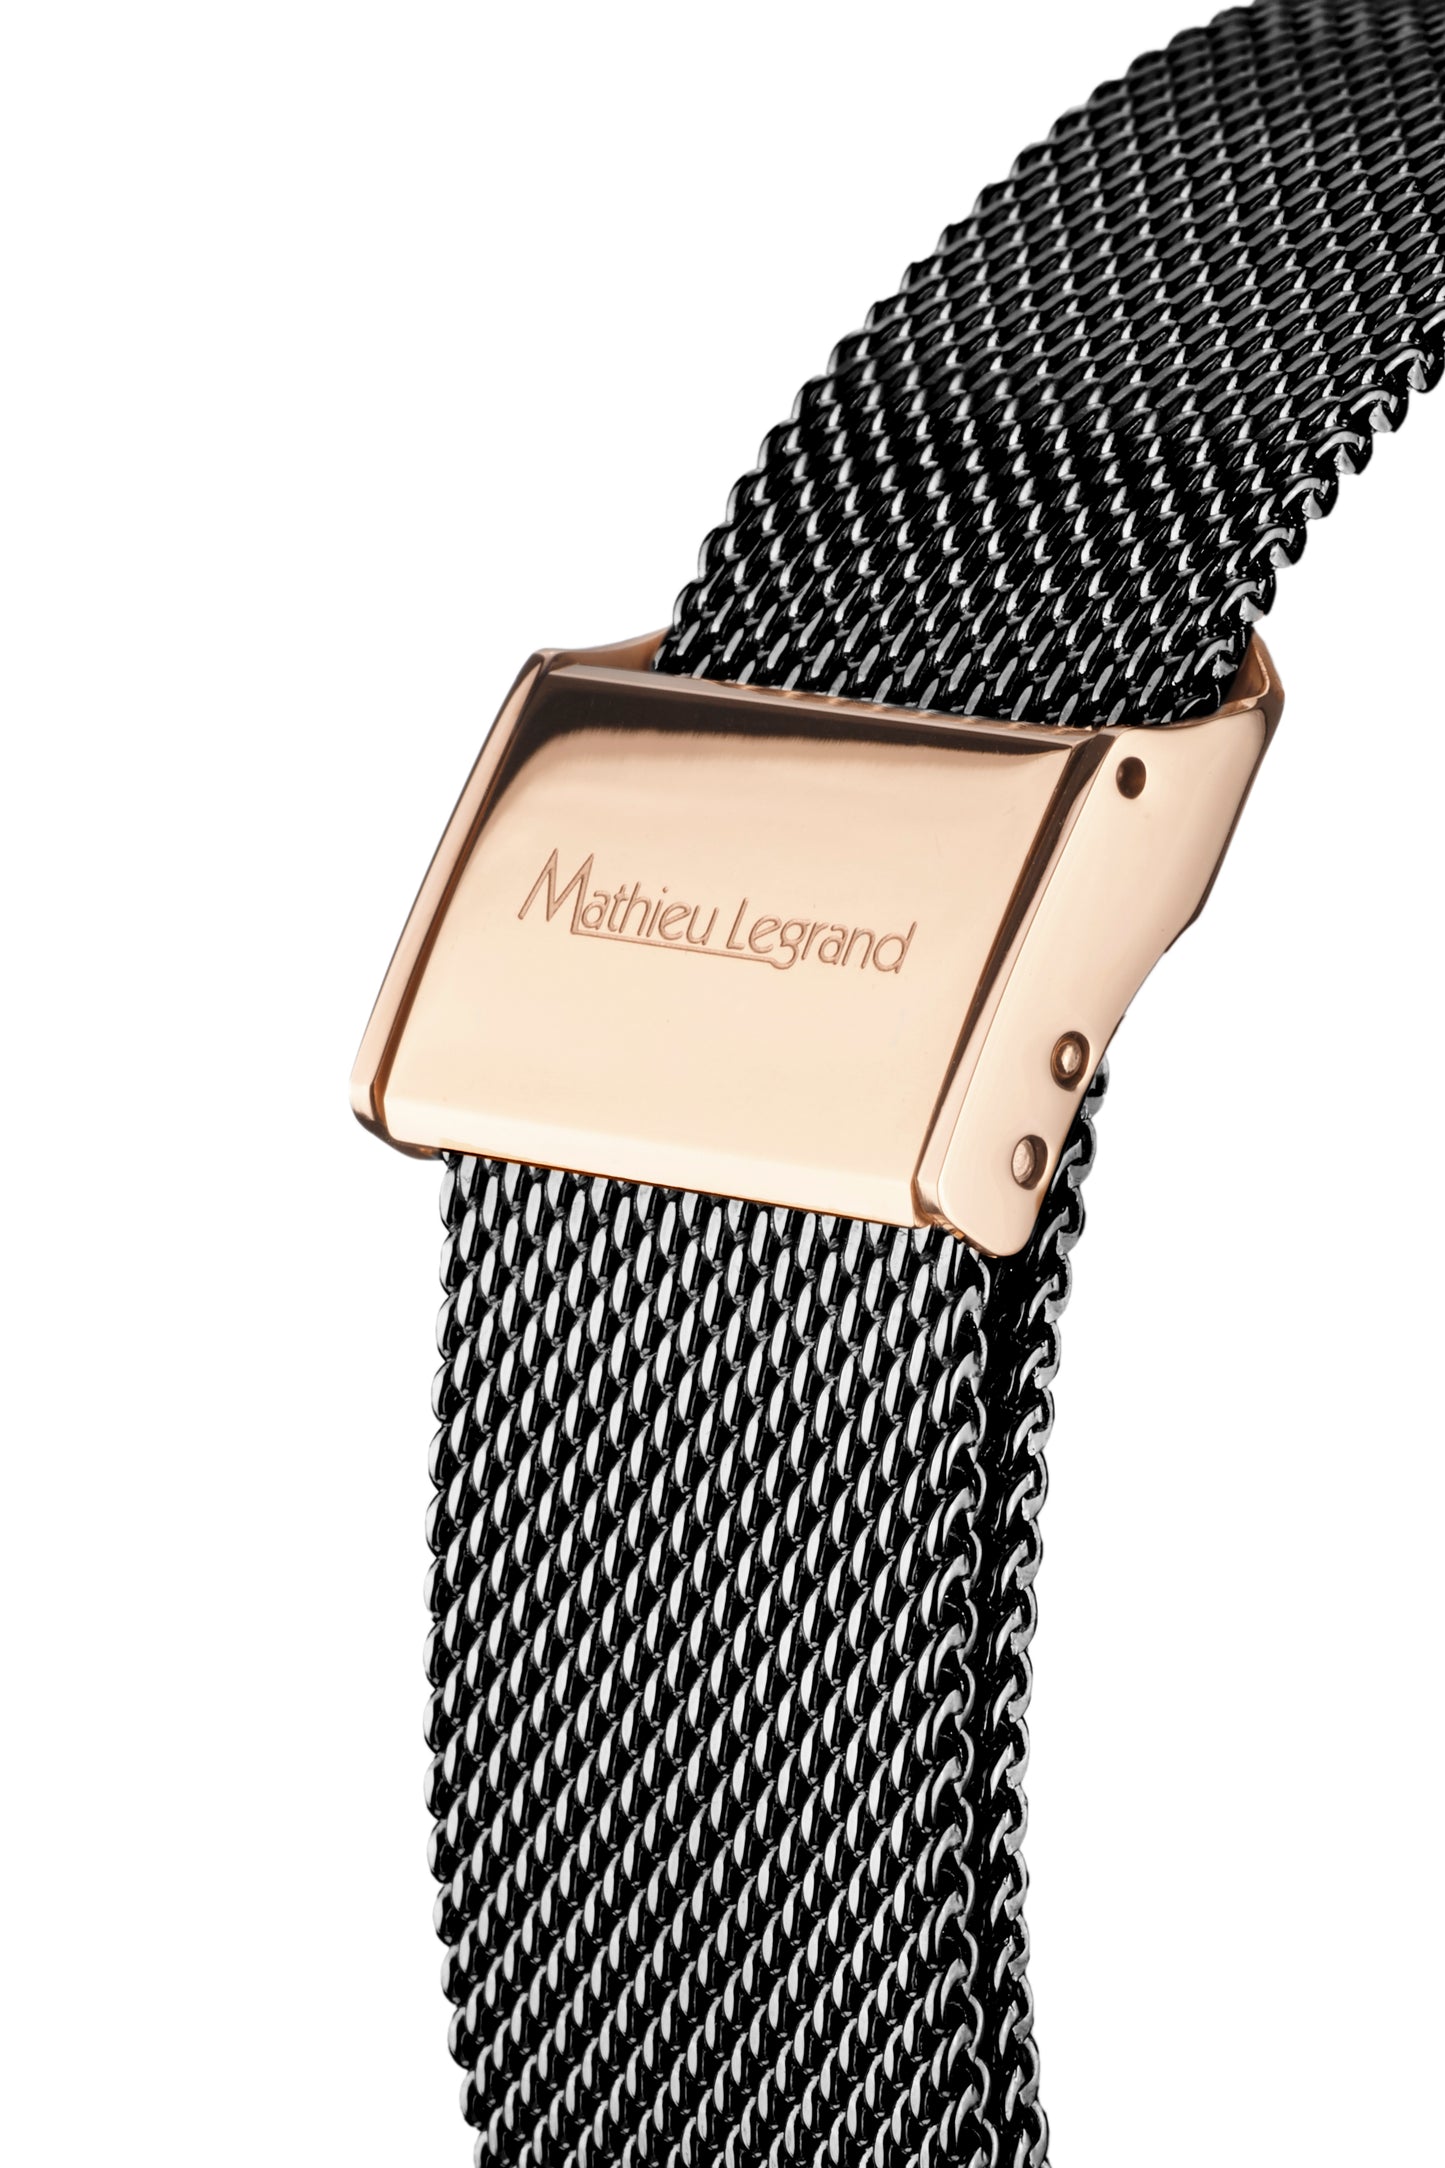 Automatic watches — Galantine — Mathieu Legrand — rosegold IP black mother of pearl black